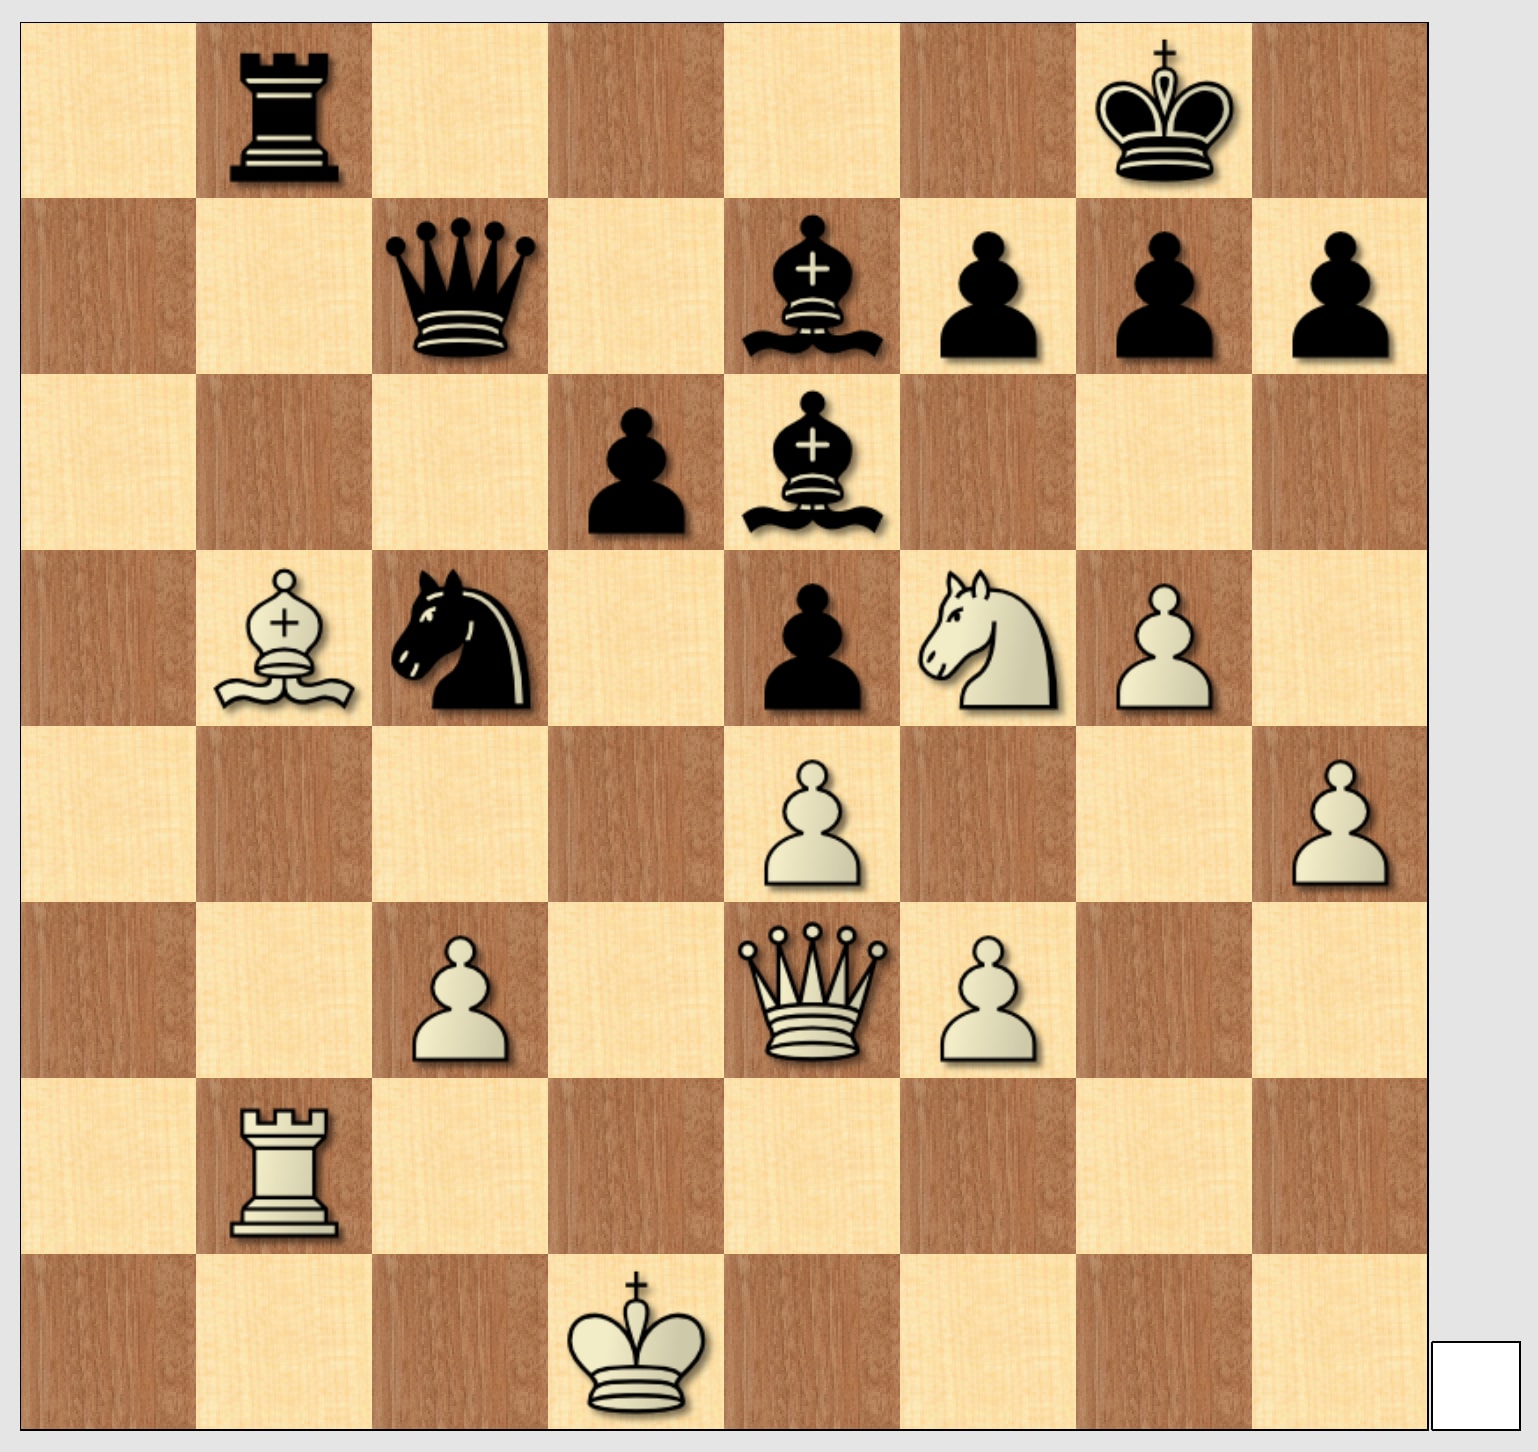 I played chess against ChatGPT-4 and lost!